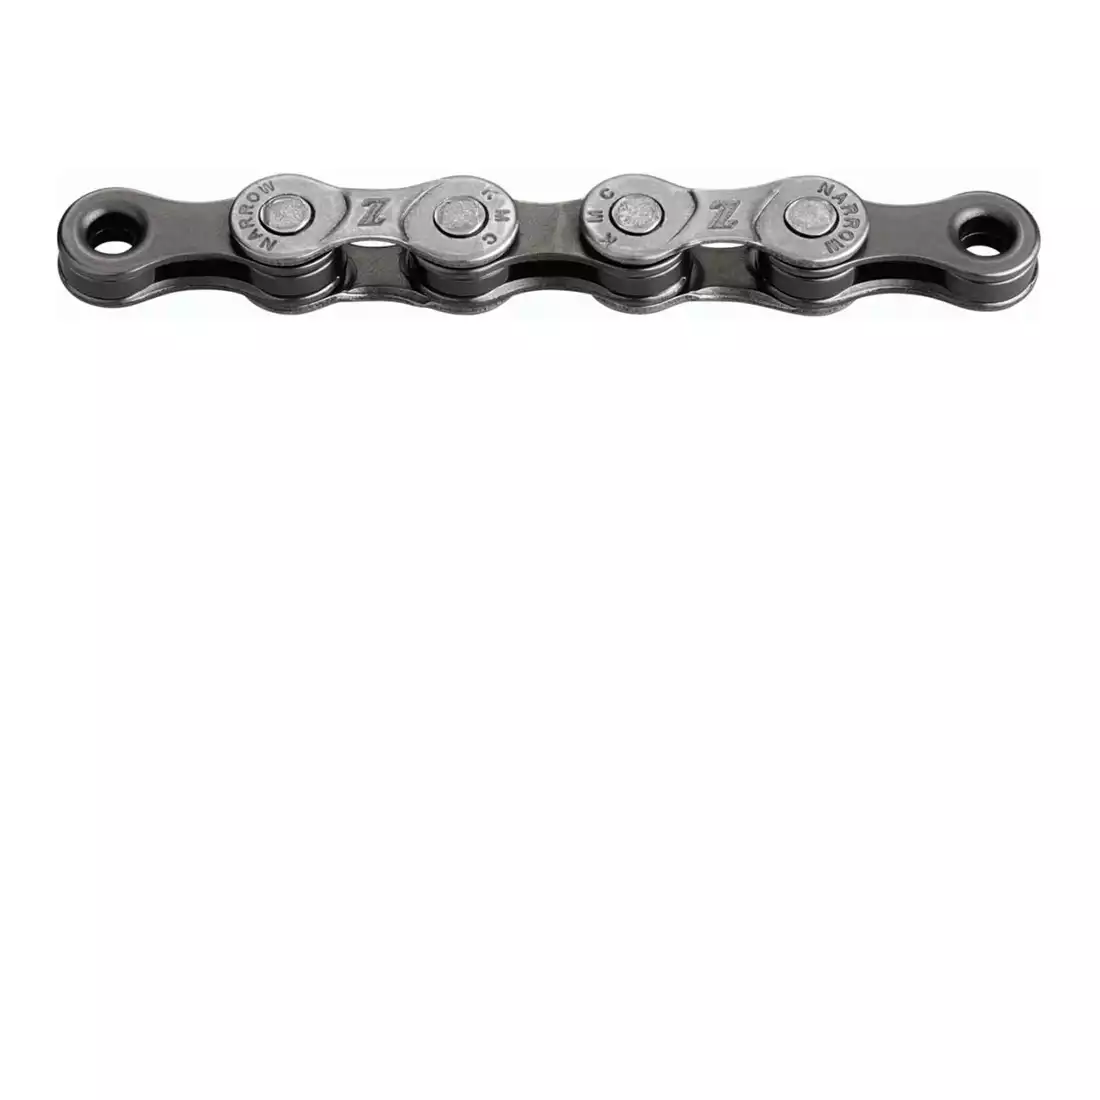 KMC Z8.3 Bicycle chain 8-speed, 116 links, gray